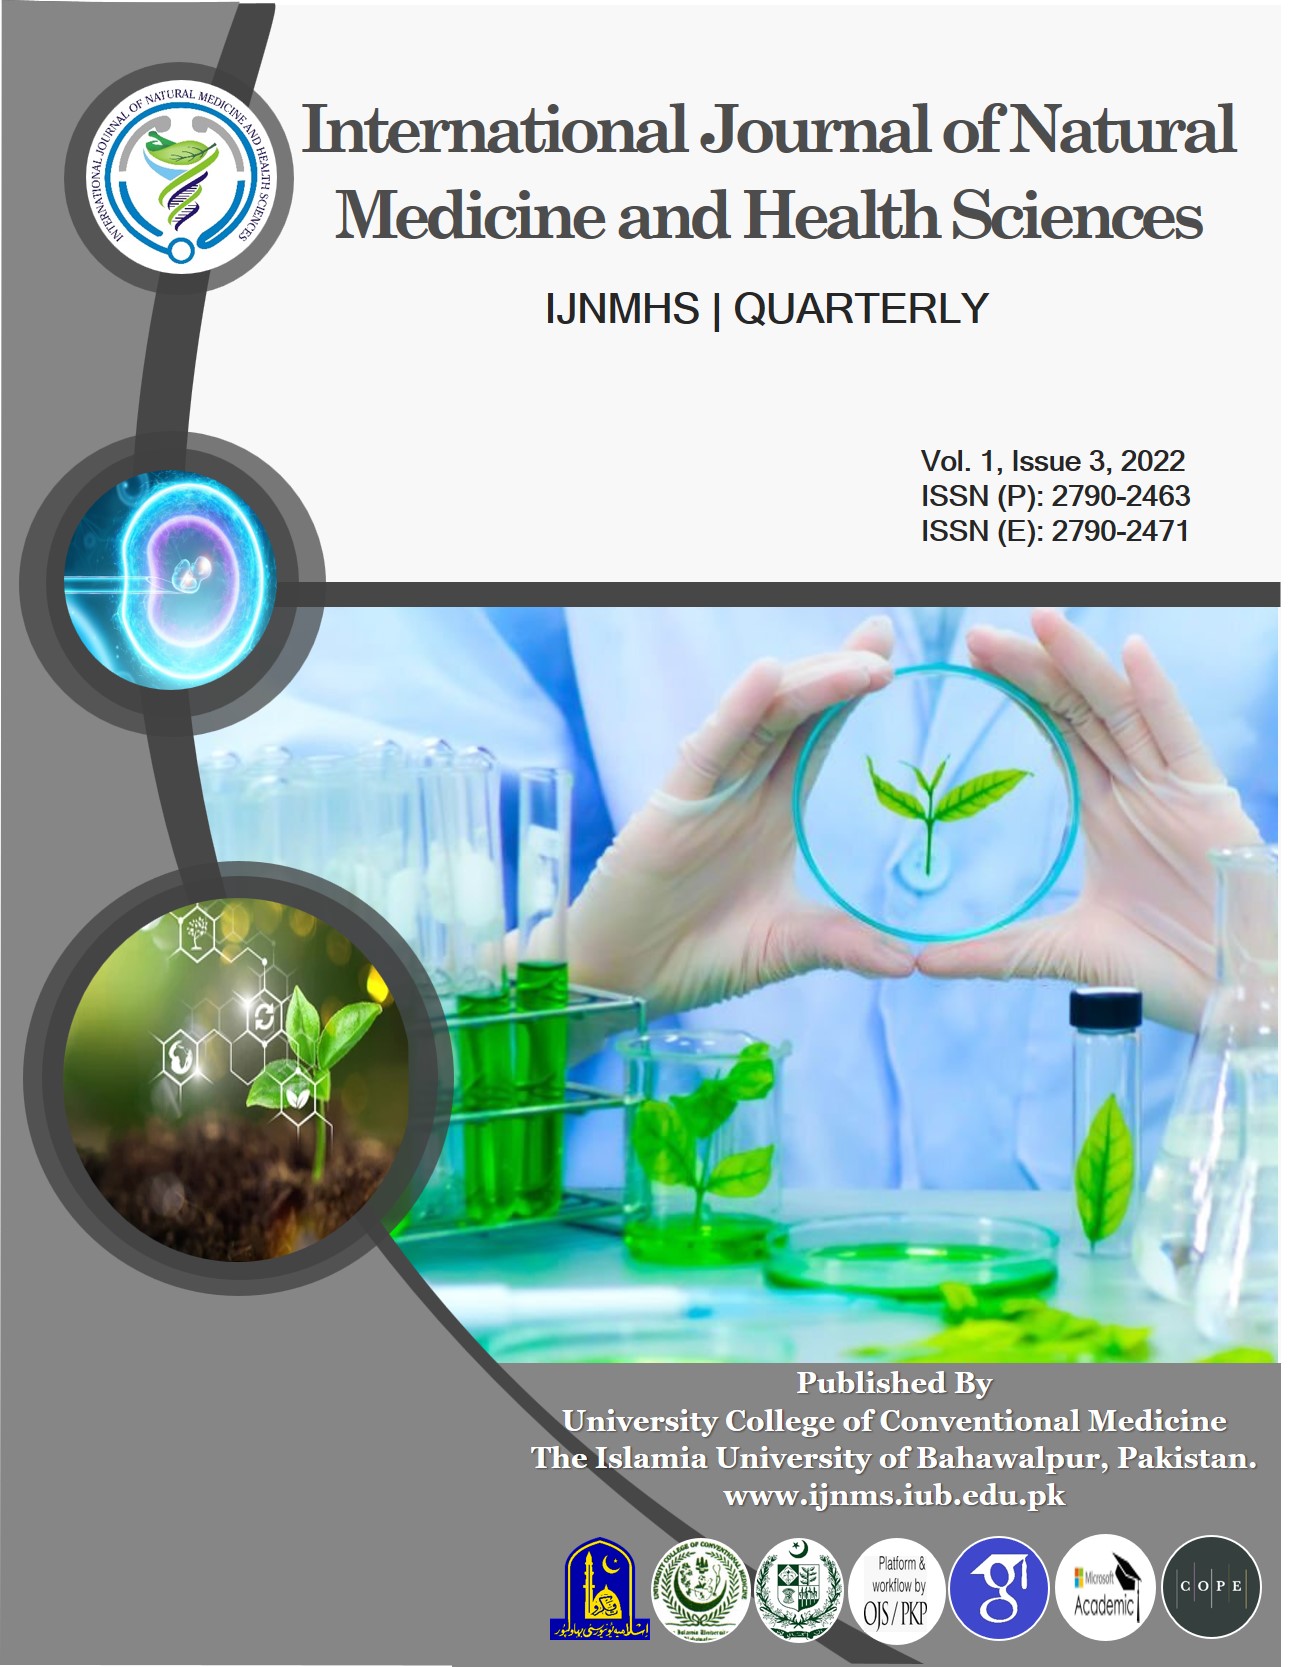 					View Vol. 1 No. 3 (2022): International Journal of Natural Medicine and Health Sciences
				